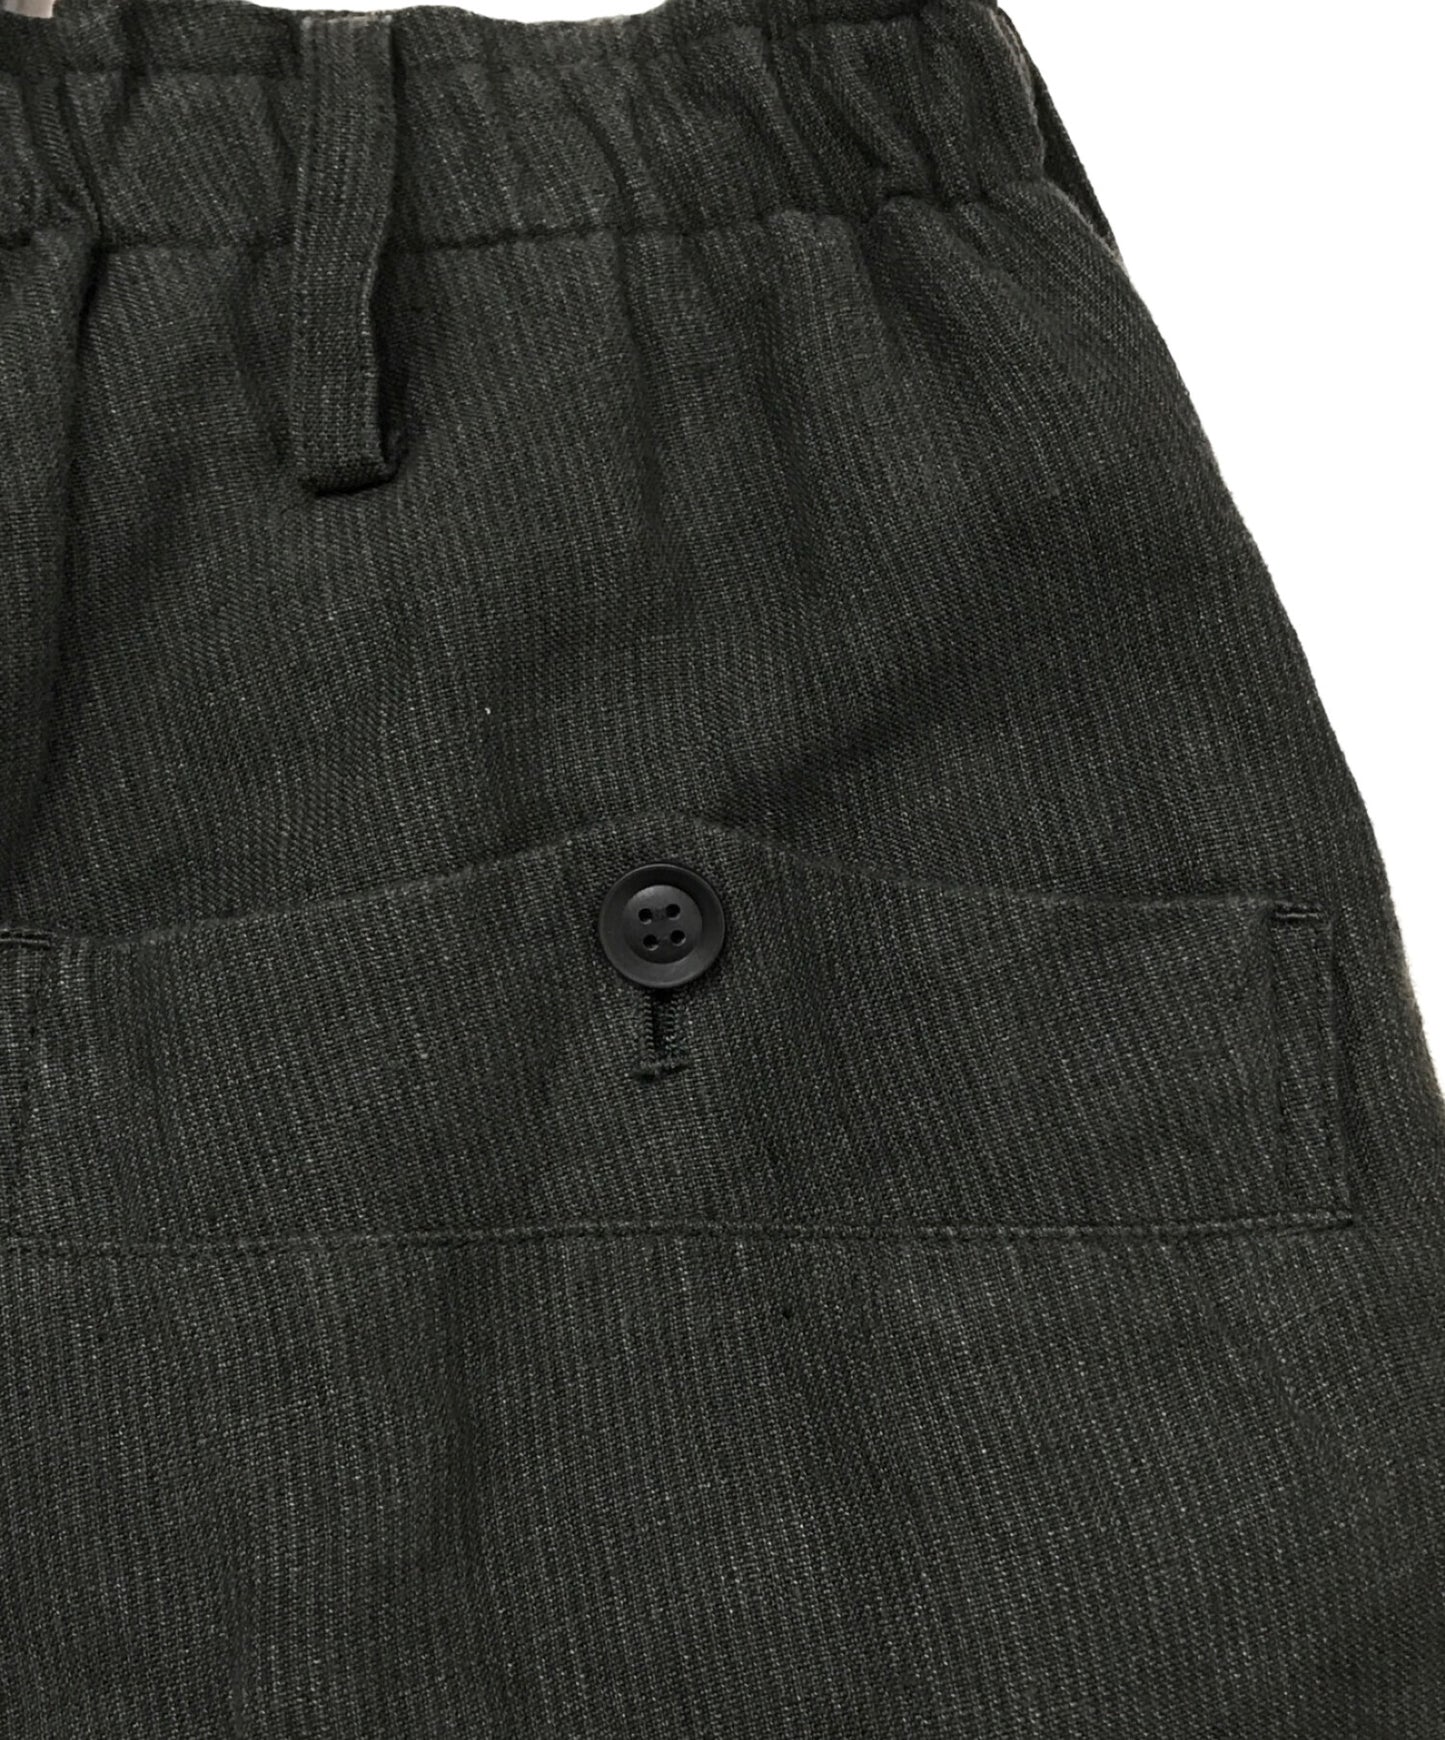 [Pre-owned] Yohji Yamamoto pour homme Wide linen pants HG-P52-305